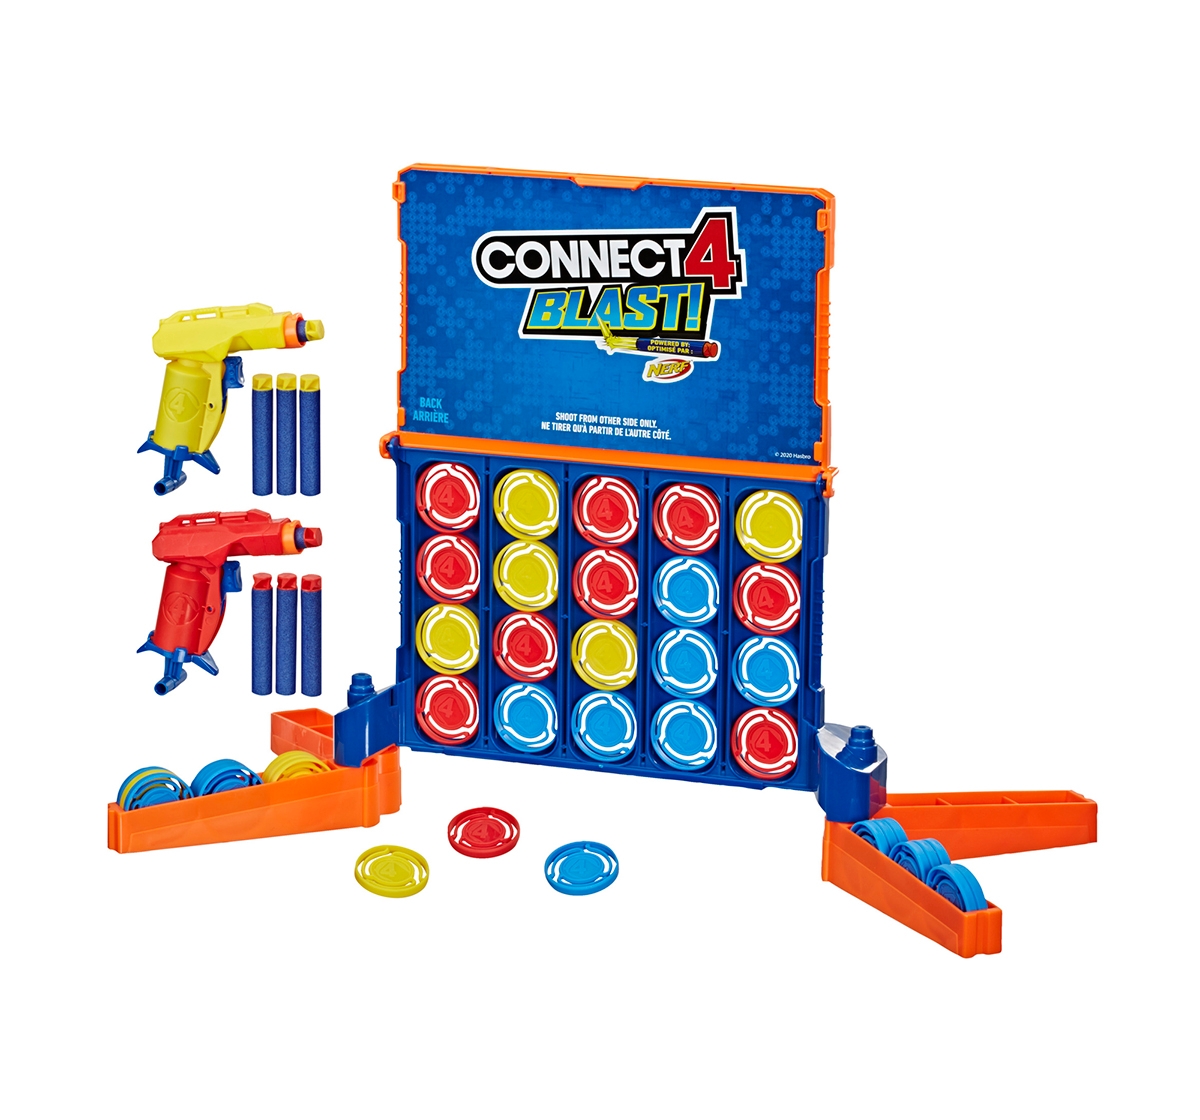 Hasbro Gaming | Hasbro Connect 4 Blast! Game With Nerf Blasters Games for Kids age 8Y+ 0